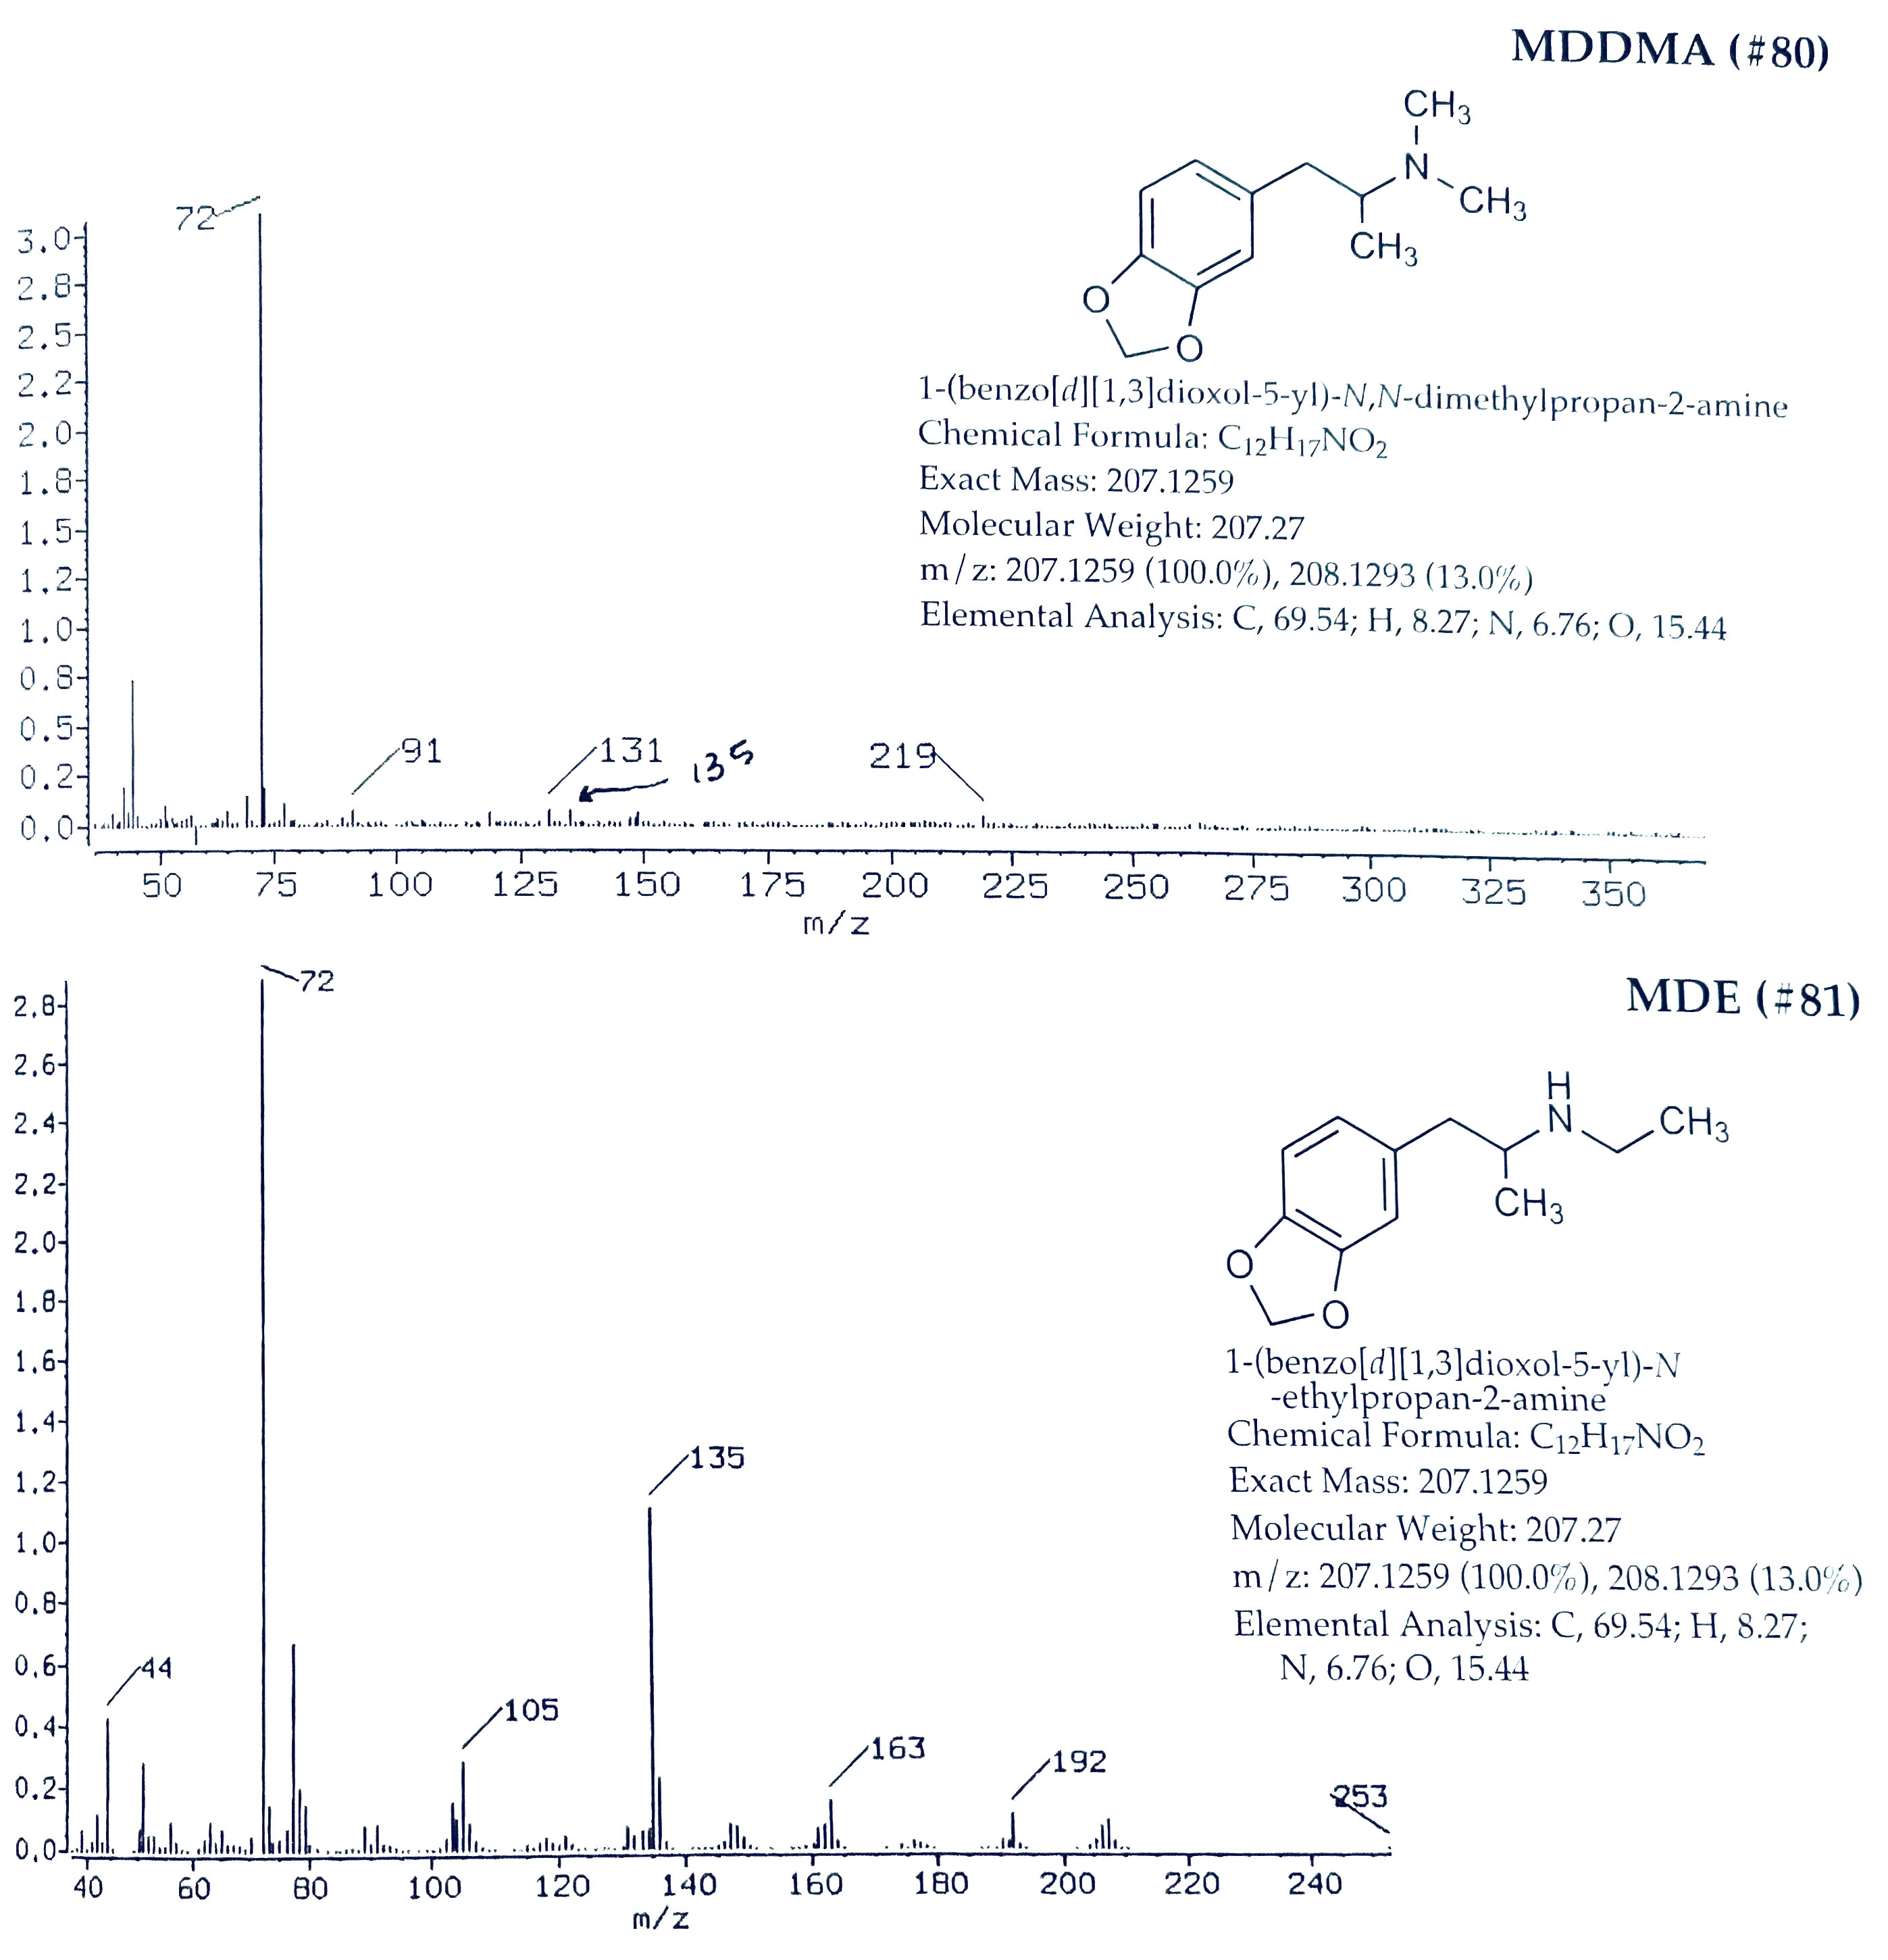 MDDMA and MDE spectra for testing purposes to distinguish from MDMA and MDA